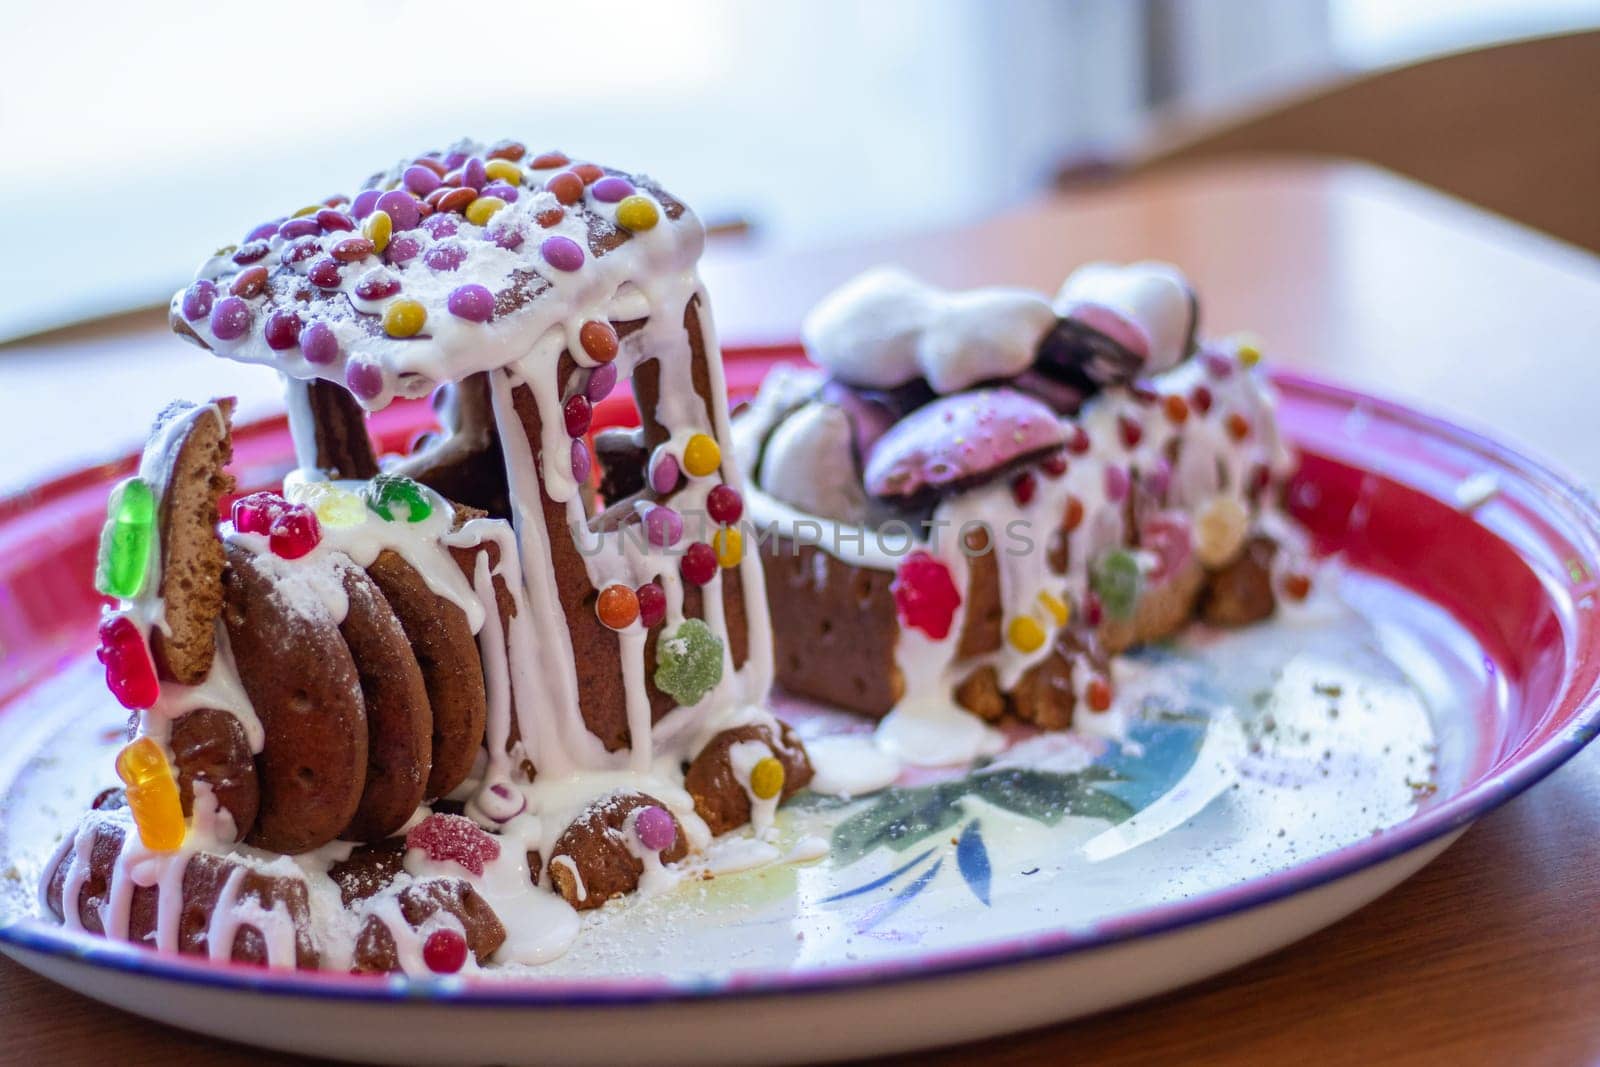 homemade gingerbread train, decorated with candies and marmalade on a colored tray